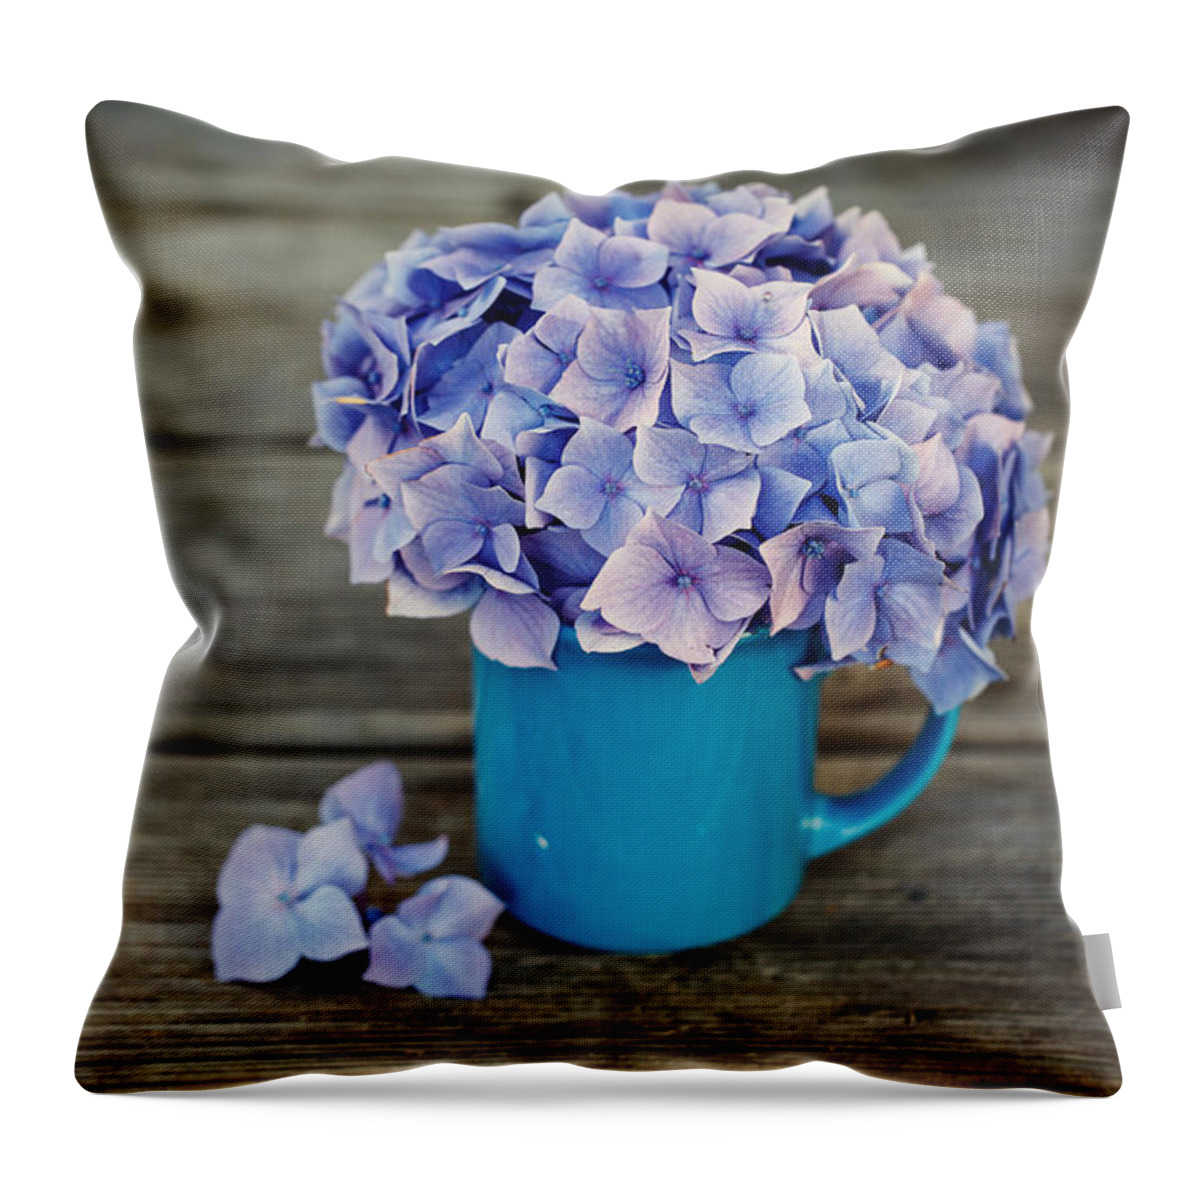 Hortensia Throw Pillow featuring the photograph Hortensia Flowers by Nailia Schwarz